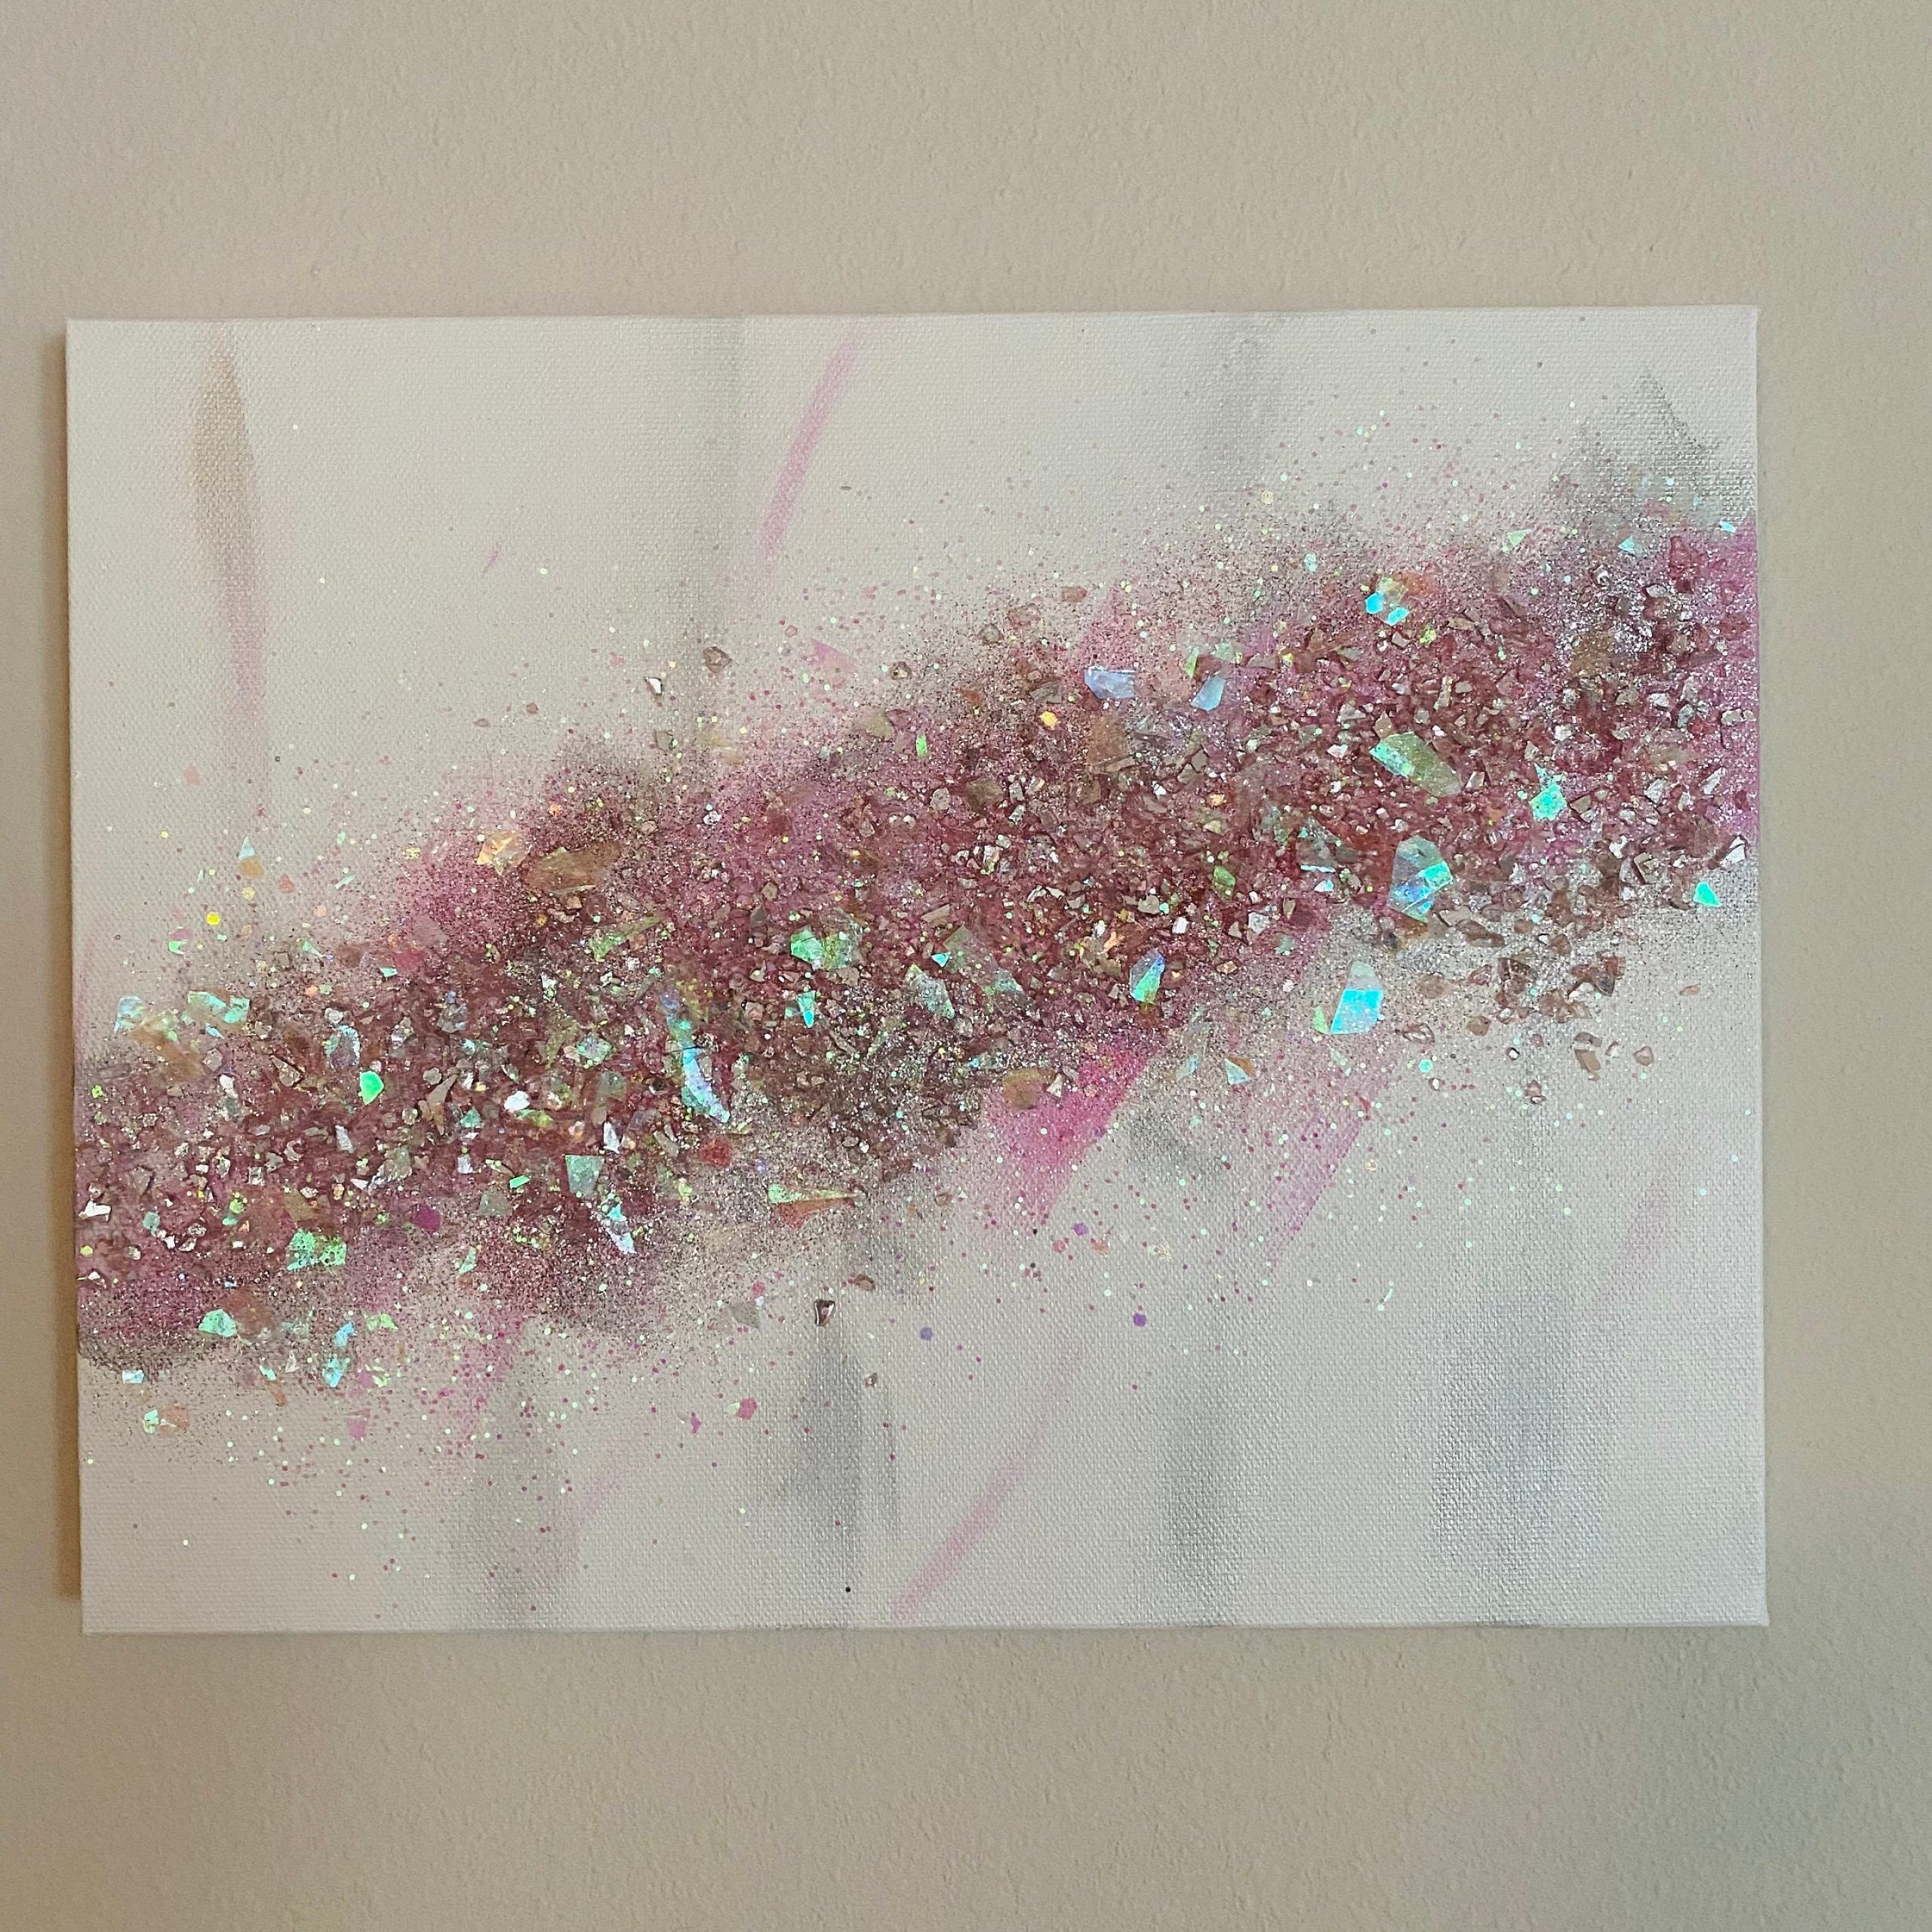 Pink Glitter Decor Z Gallerie Inspired White And Pink – Etsy For Most Recent Glitter Pink Wall Art (View 2 of 20)